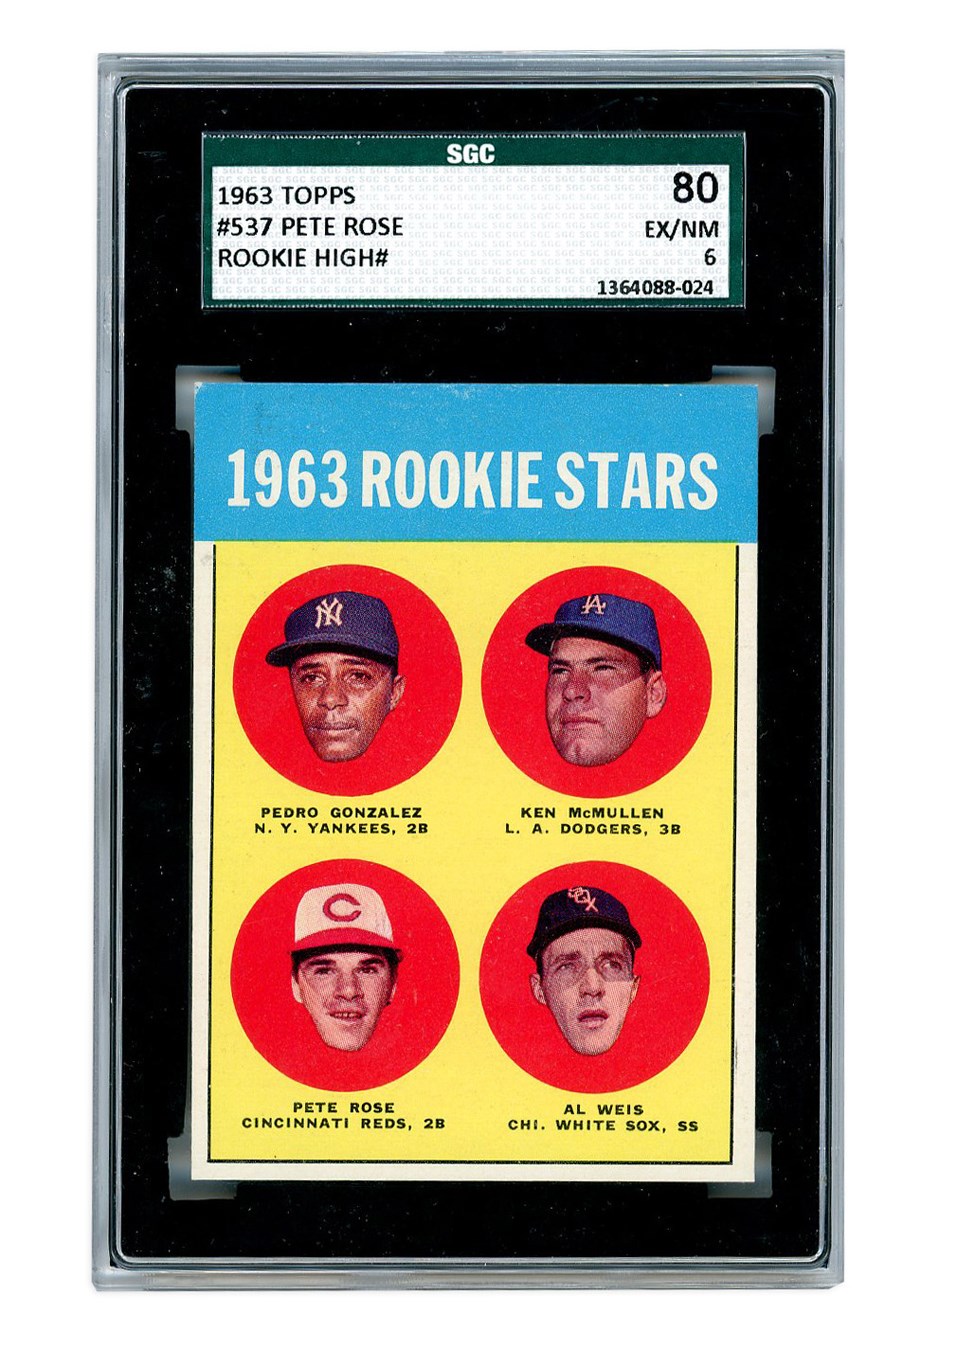 Baseball and Trading Cards - 1963 Topps #537 Pete Rose Rookie Card - SGC 80 EX/NM 6